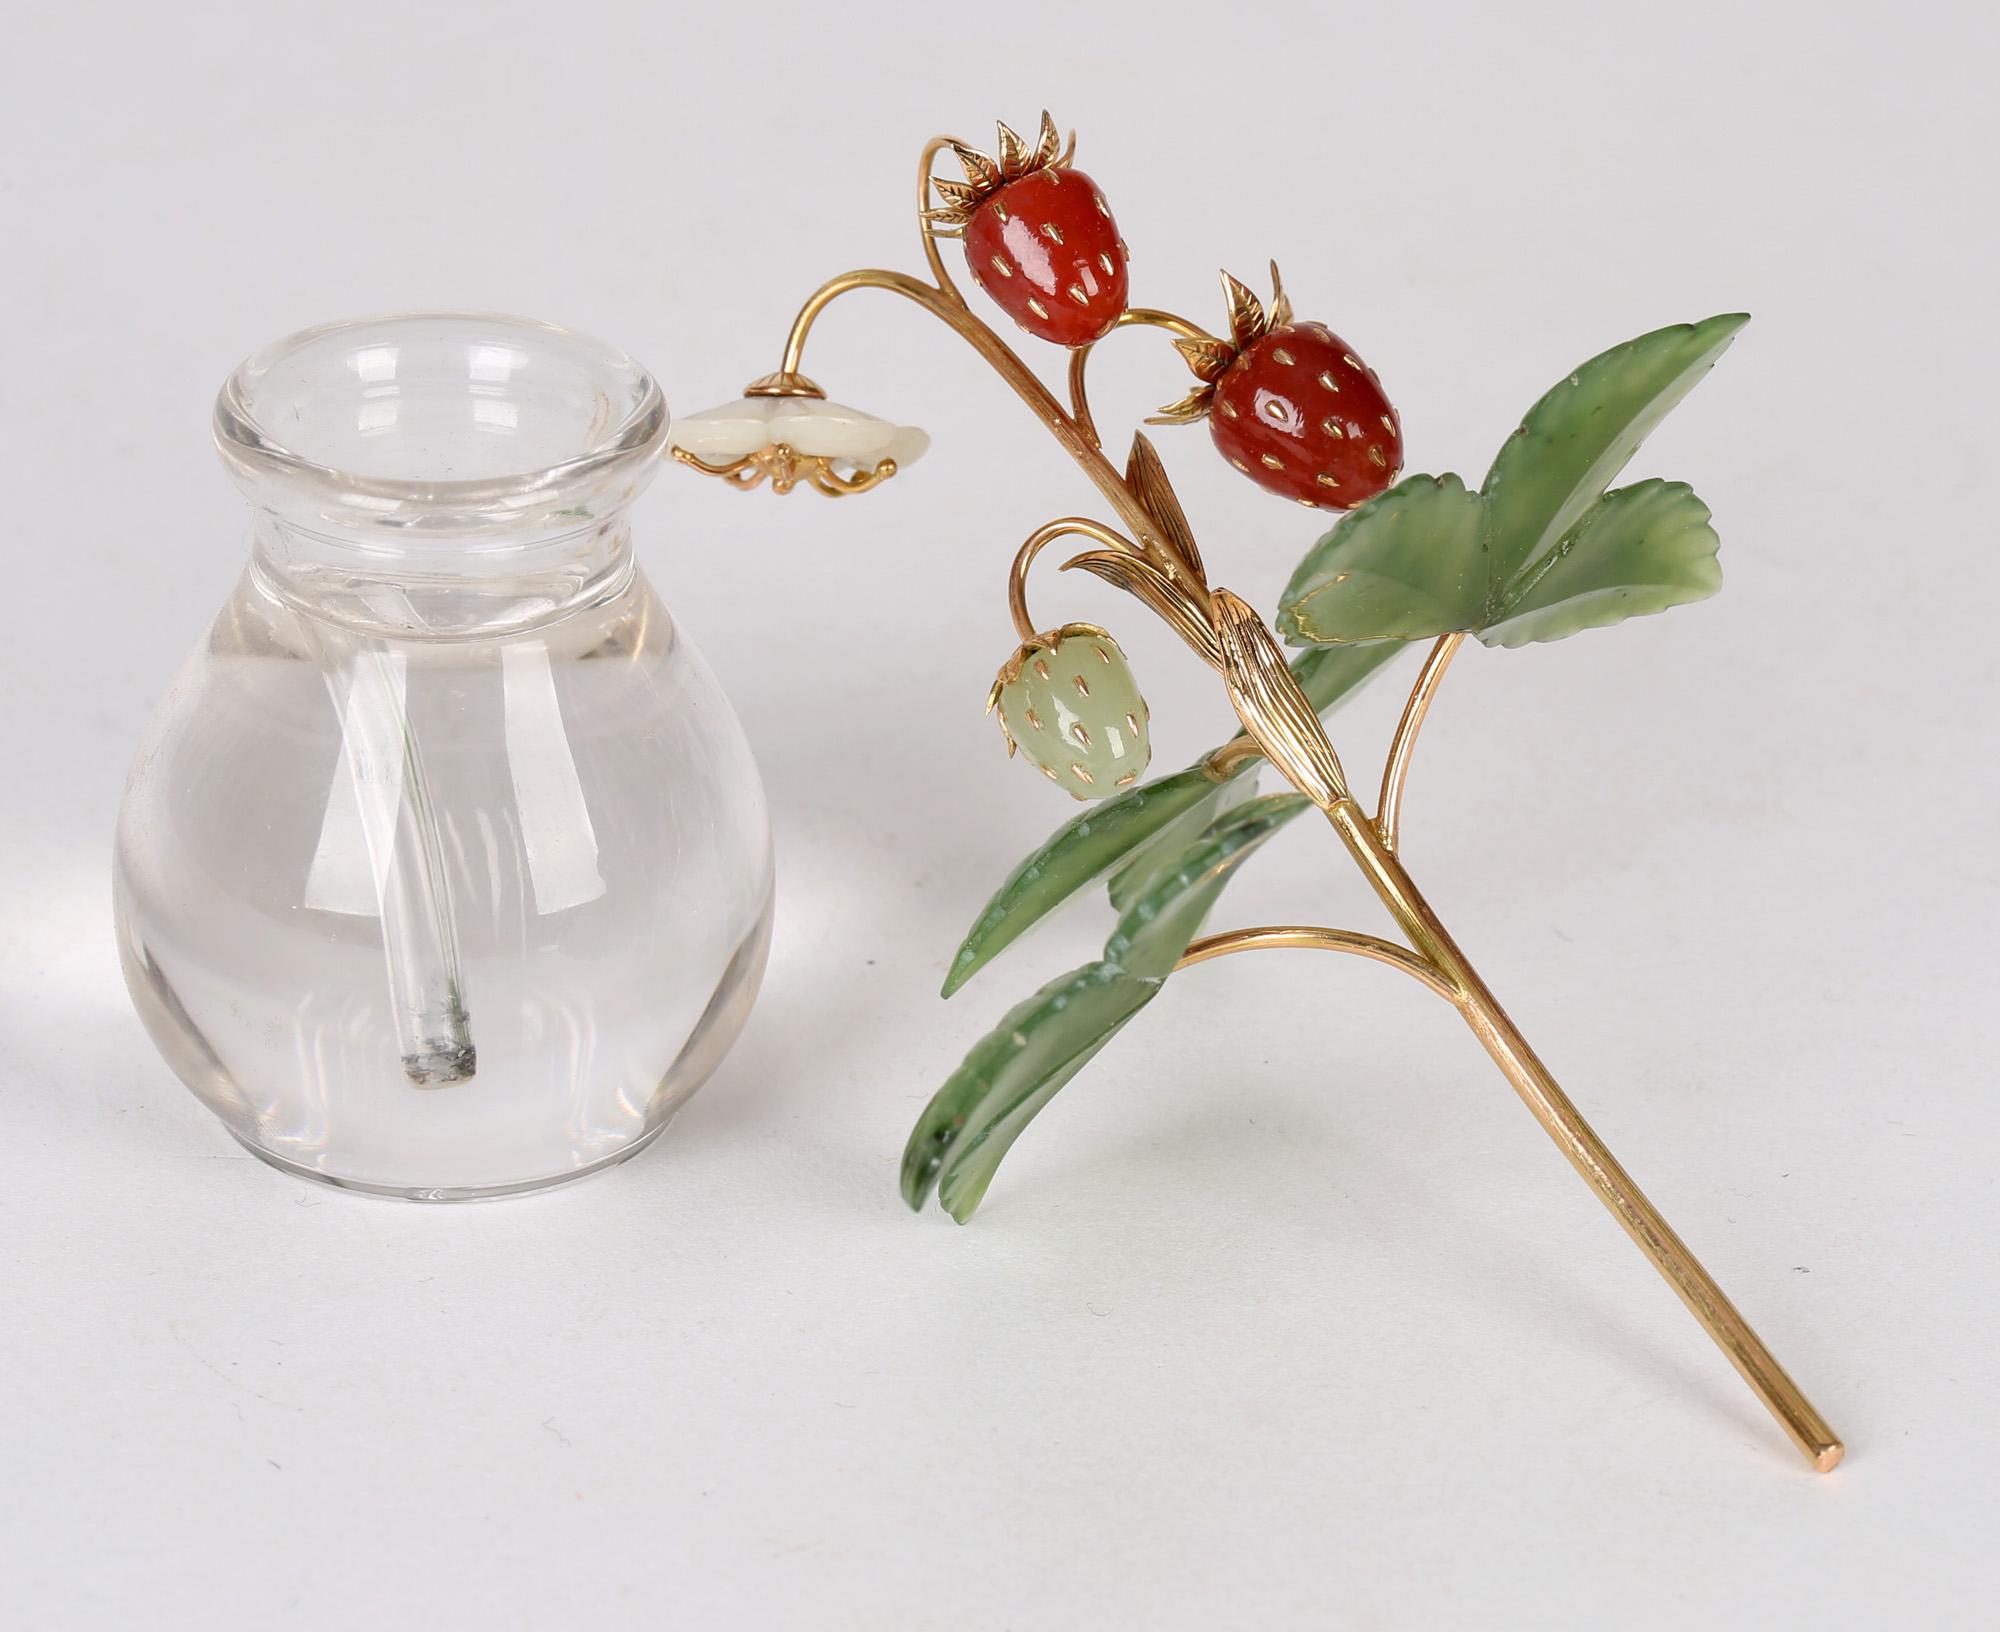 Fabergé Style Exquisite Wild Strawberry Stem with Crystal Vase 3